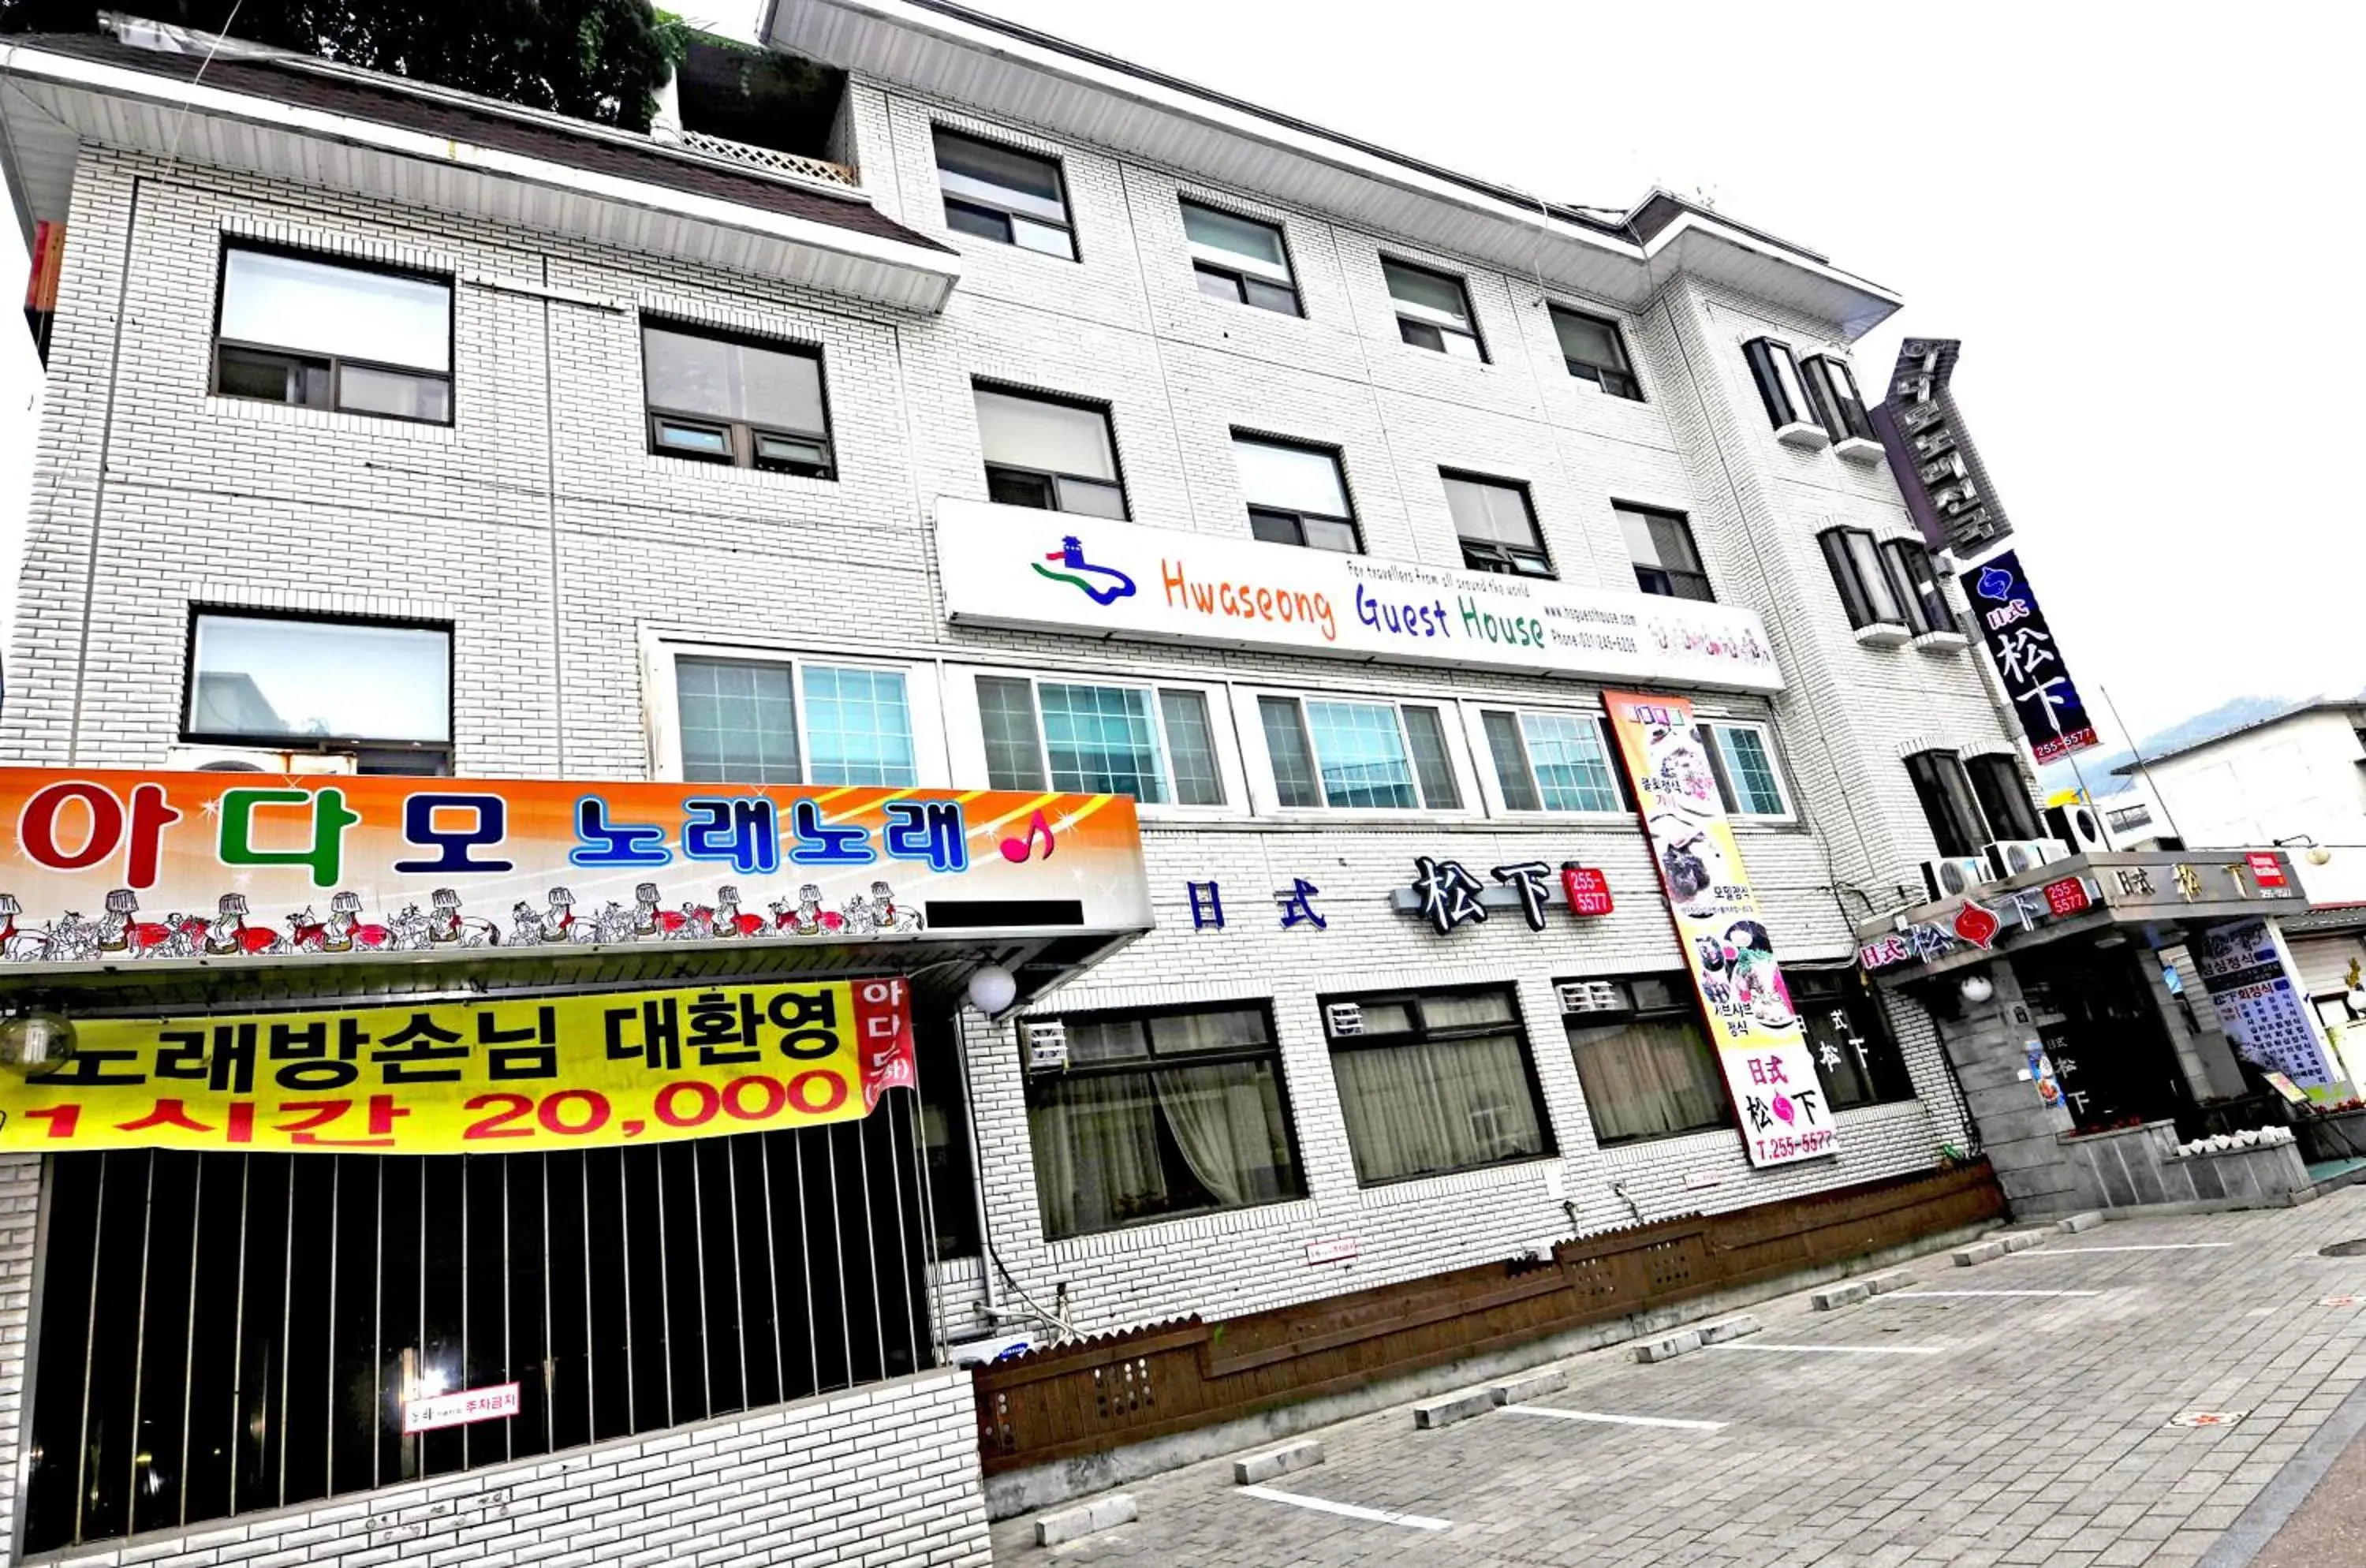 Property Building in Hwaseong Guest House